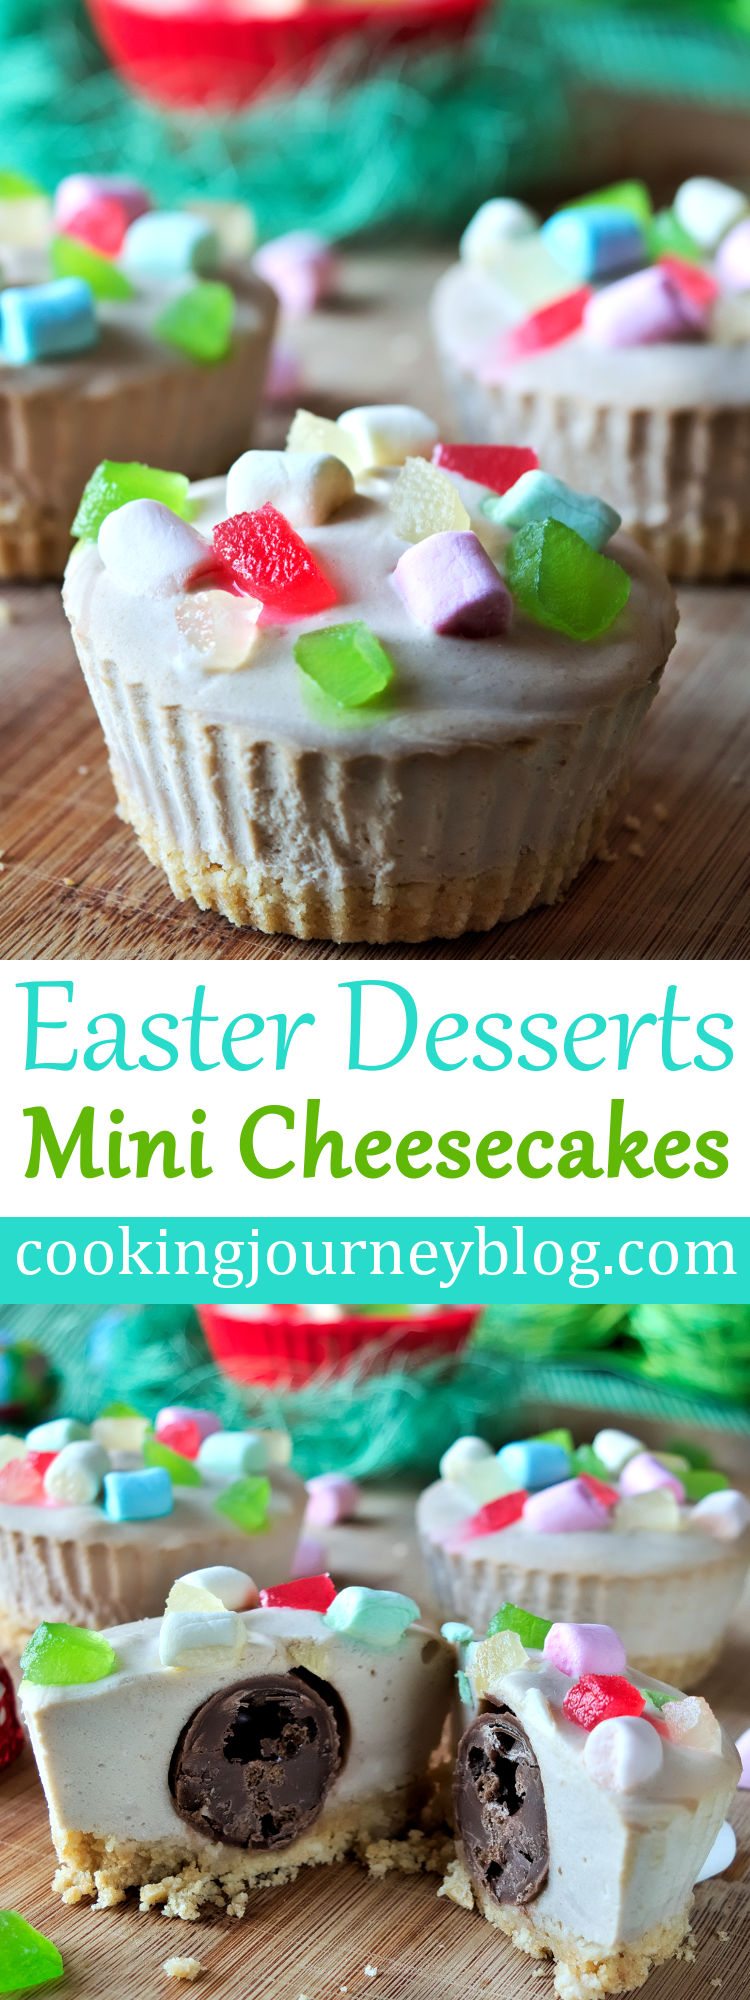 Get this mini cheesecake recipe to make easy and tasty Easter desserts! No bake cheesecake, that is topped with marshmallows and candied fruits, look pretty and also have a surprise inside. #easterrecipes #easter #desserts #surprise